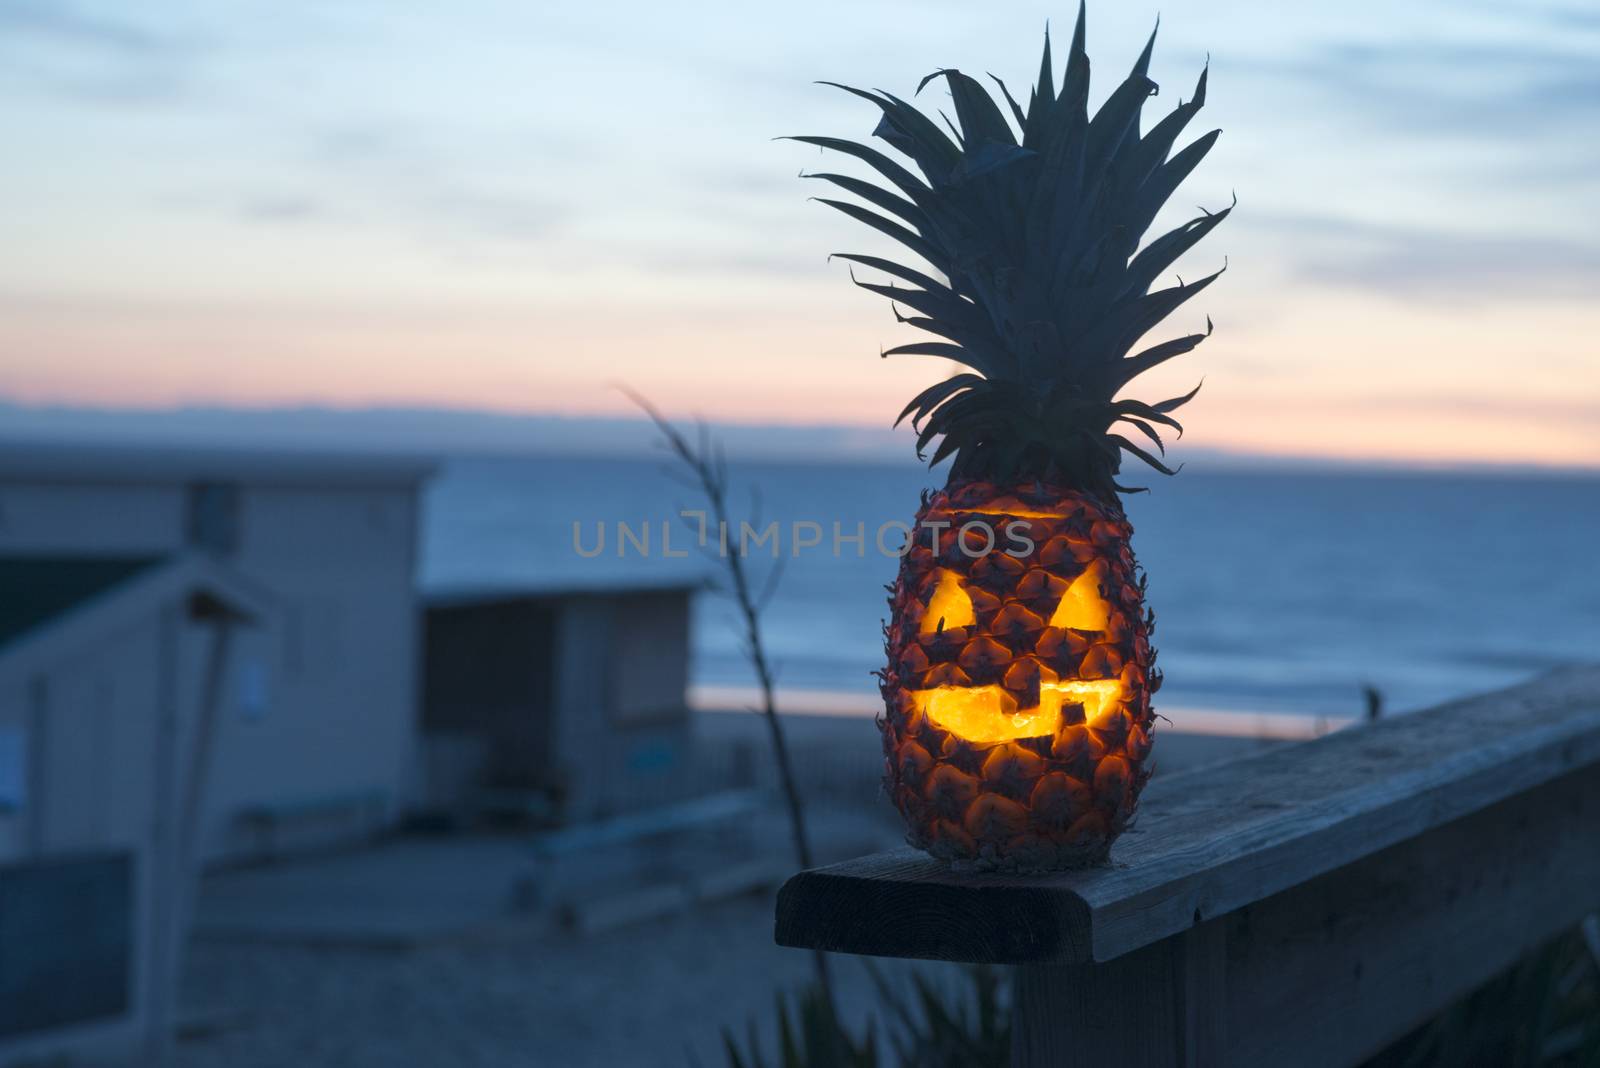 Jack o lantern halloween face carved into pineapple instead of pumpkin. Tropical fruit with ocean in background